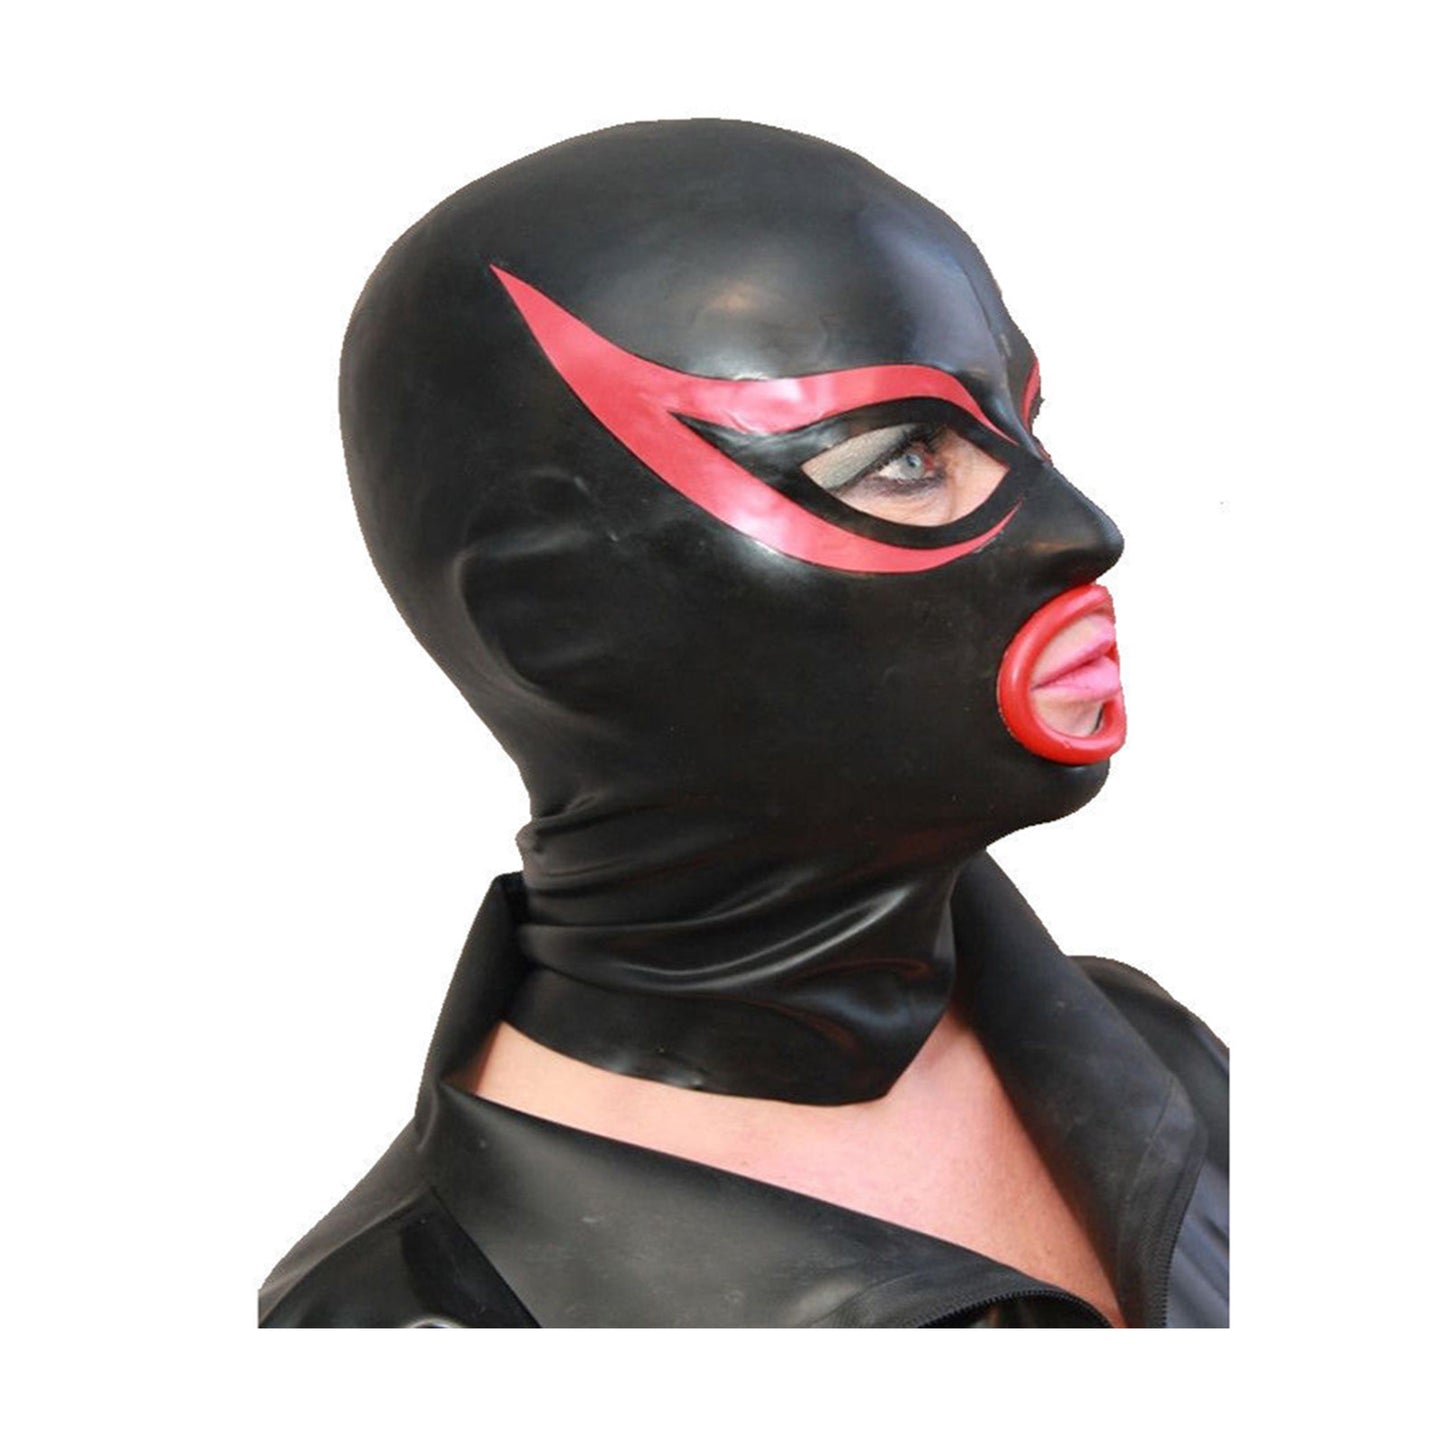 MONNIK Latex Hood Mask Flying Eye Design with Red Trim Rubber Unisex Mask for Catsuit Party Cosplay Club Wear